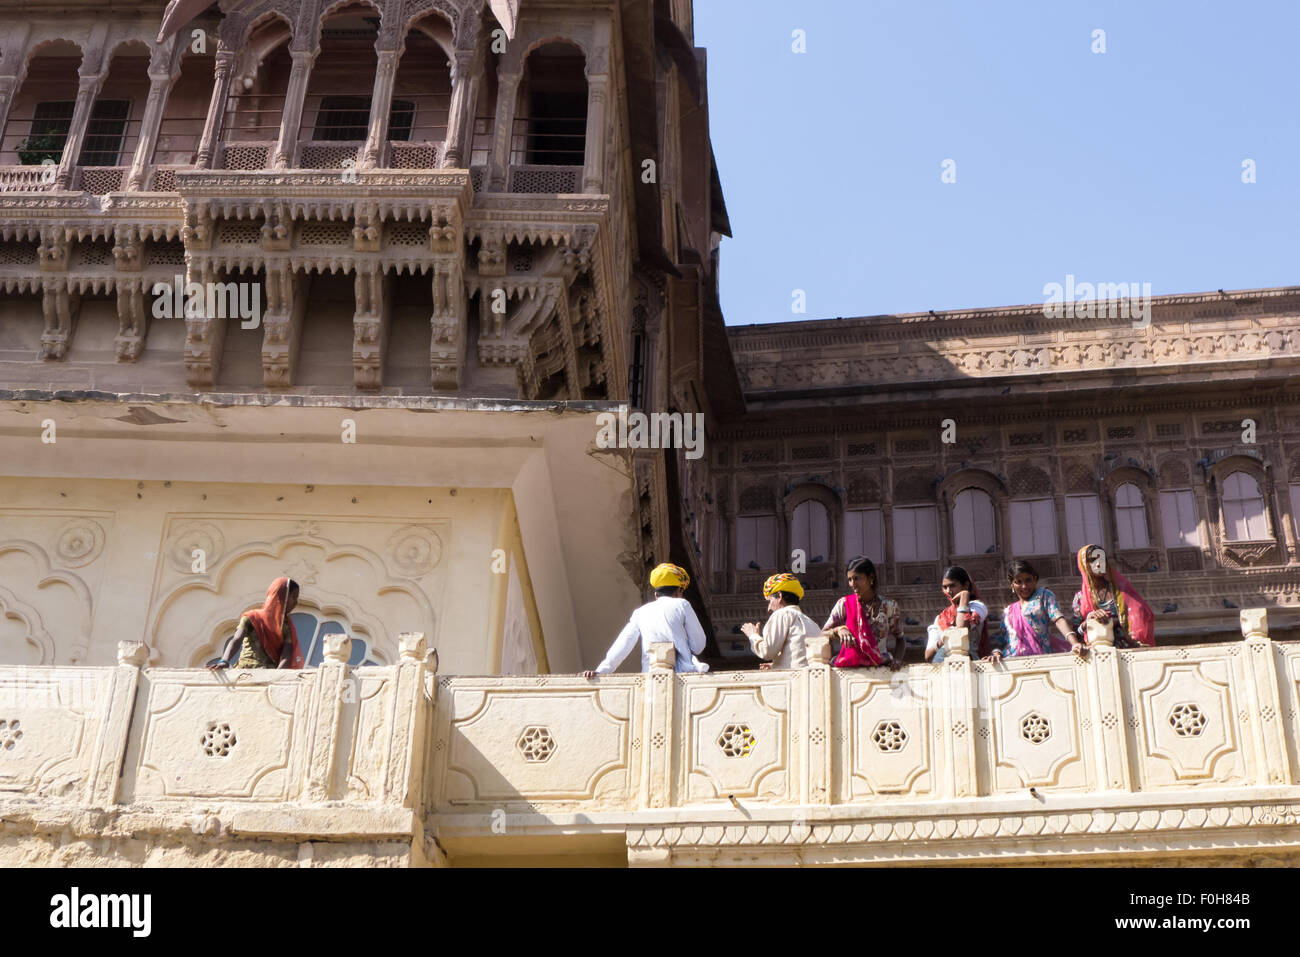 Jodhpur, India. Mehrangarh Fort; Indian visitors in bright colourful dress on a balcony Stock Photo